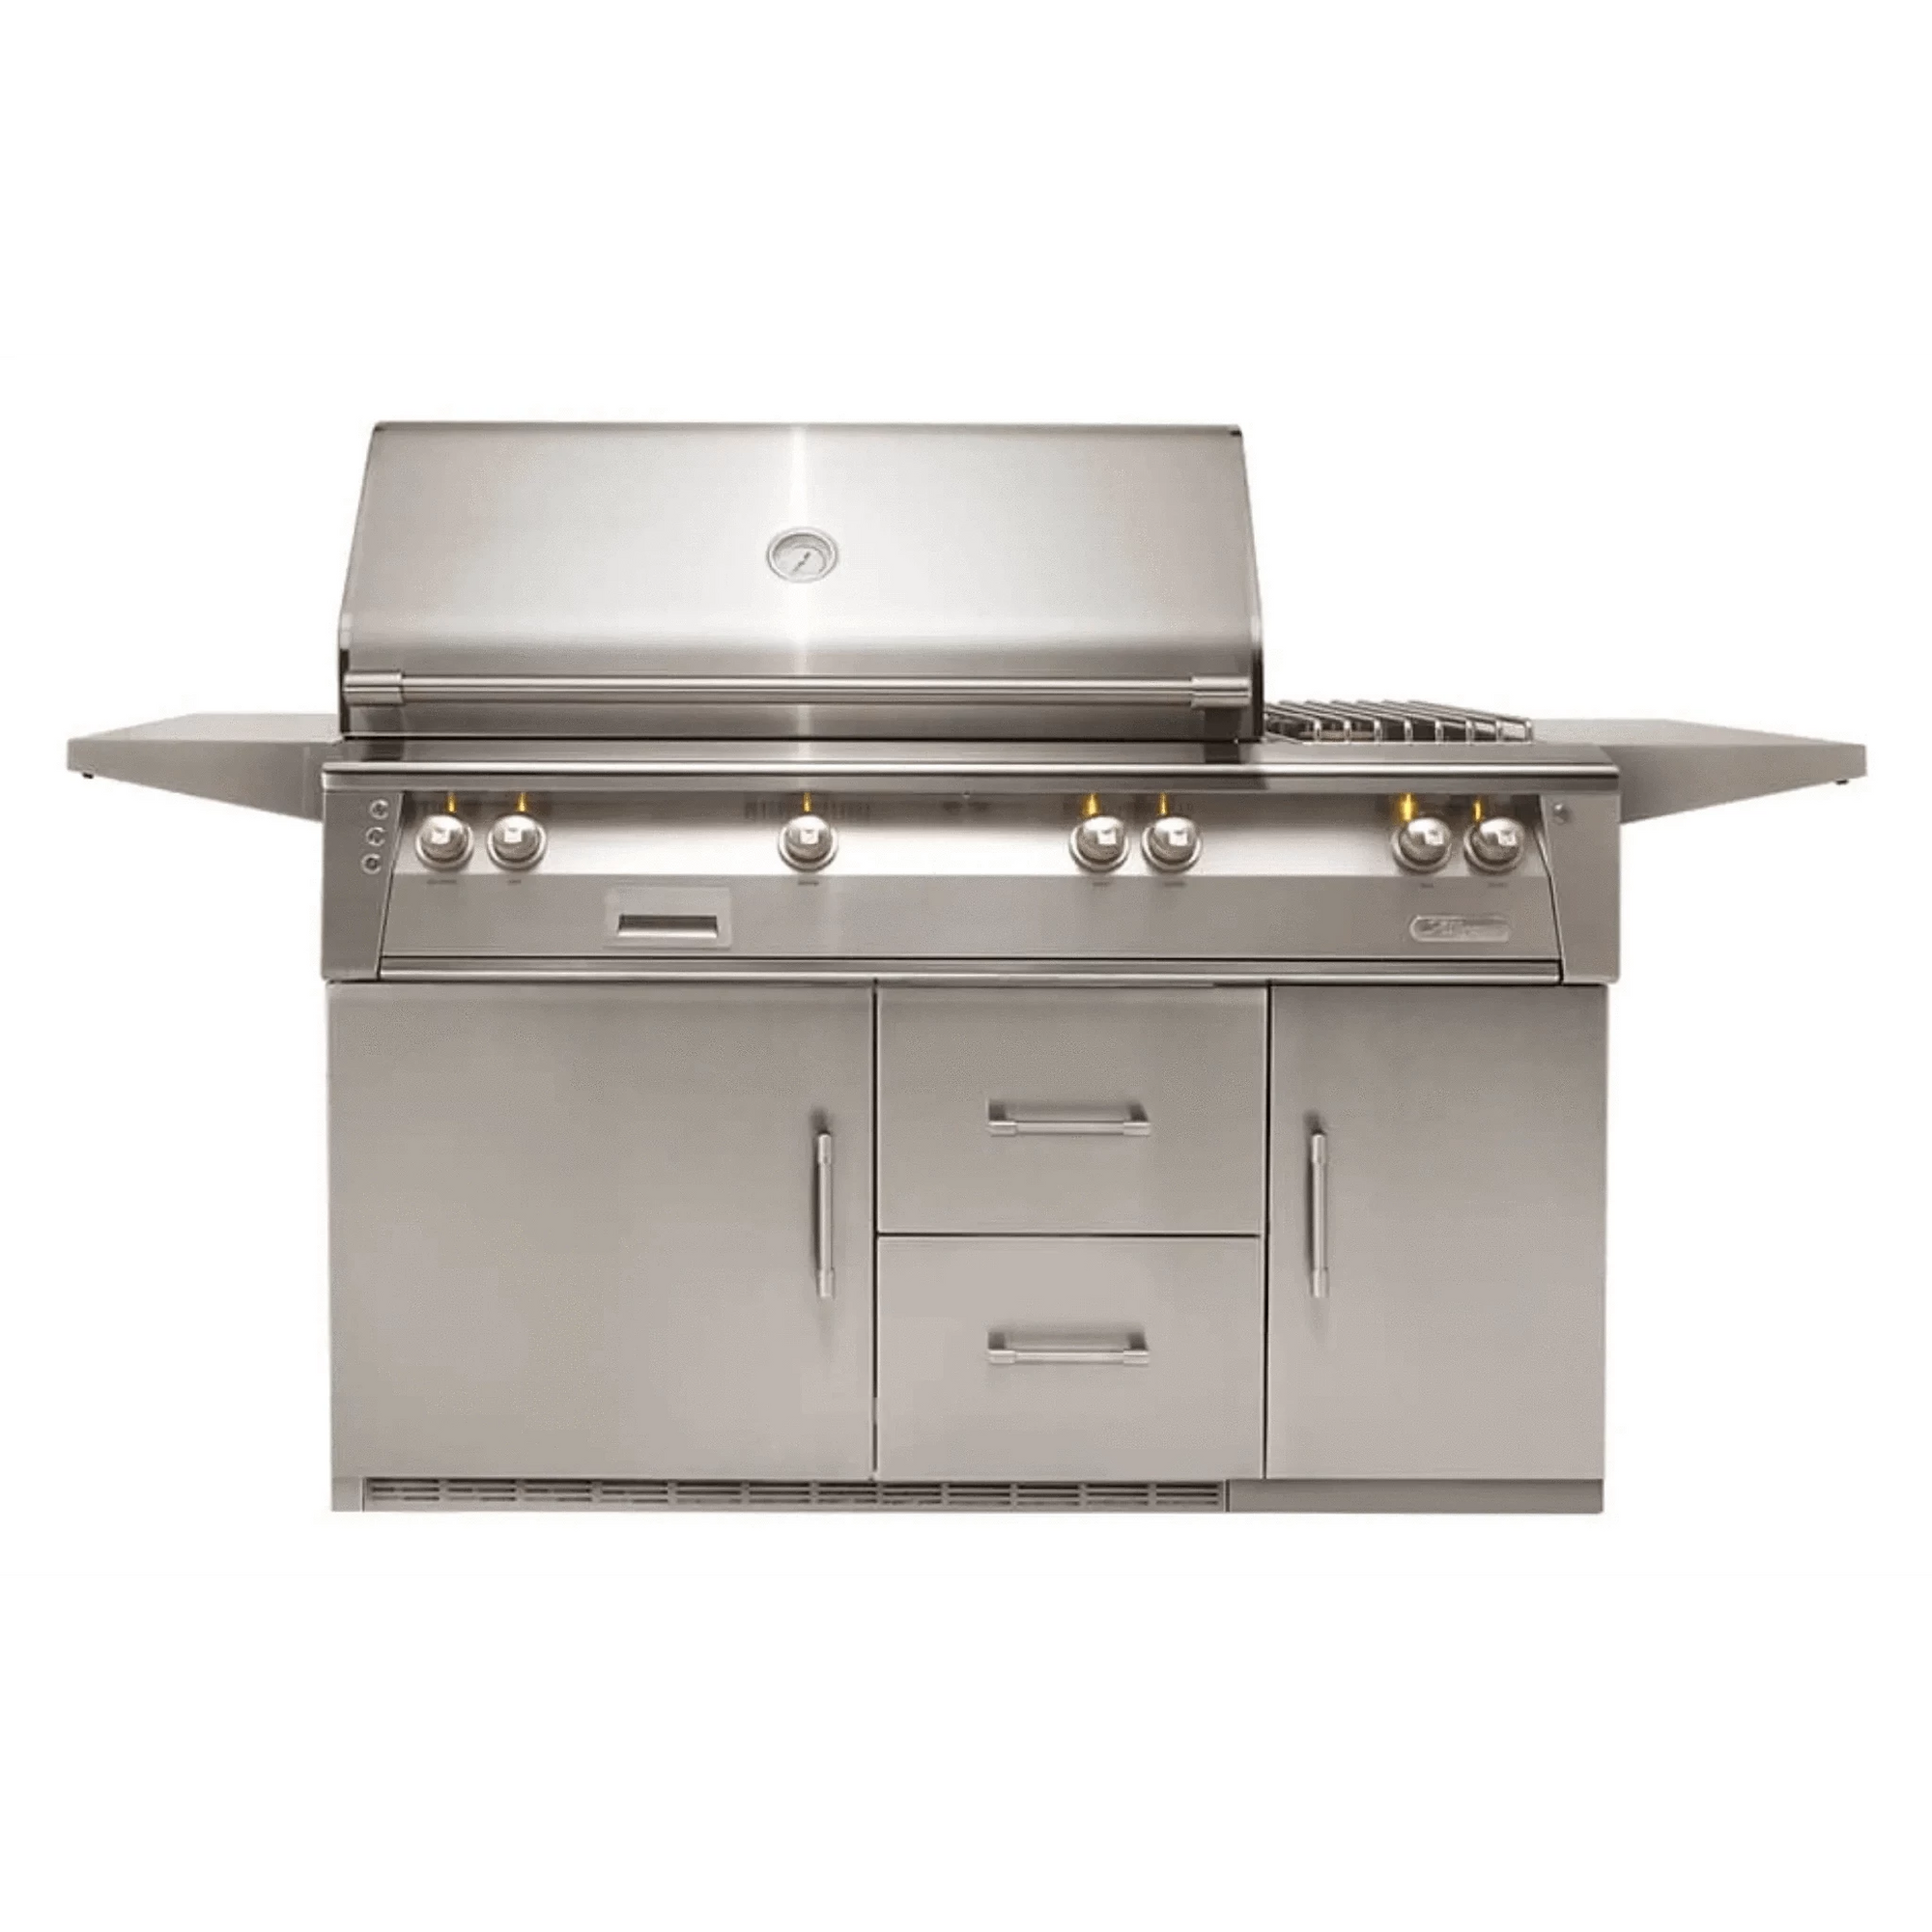 Alfresco 56" Deluxe Luxury Freestanding Grill-Natural Gas